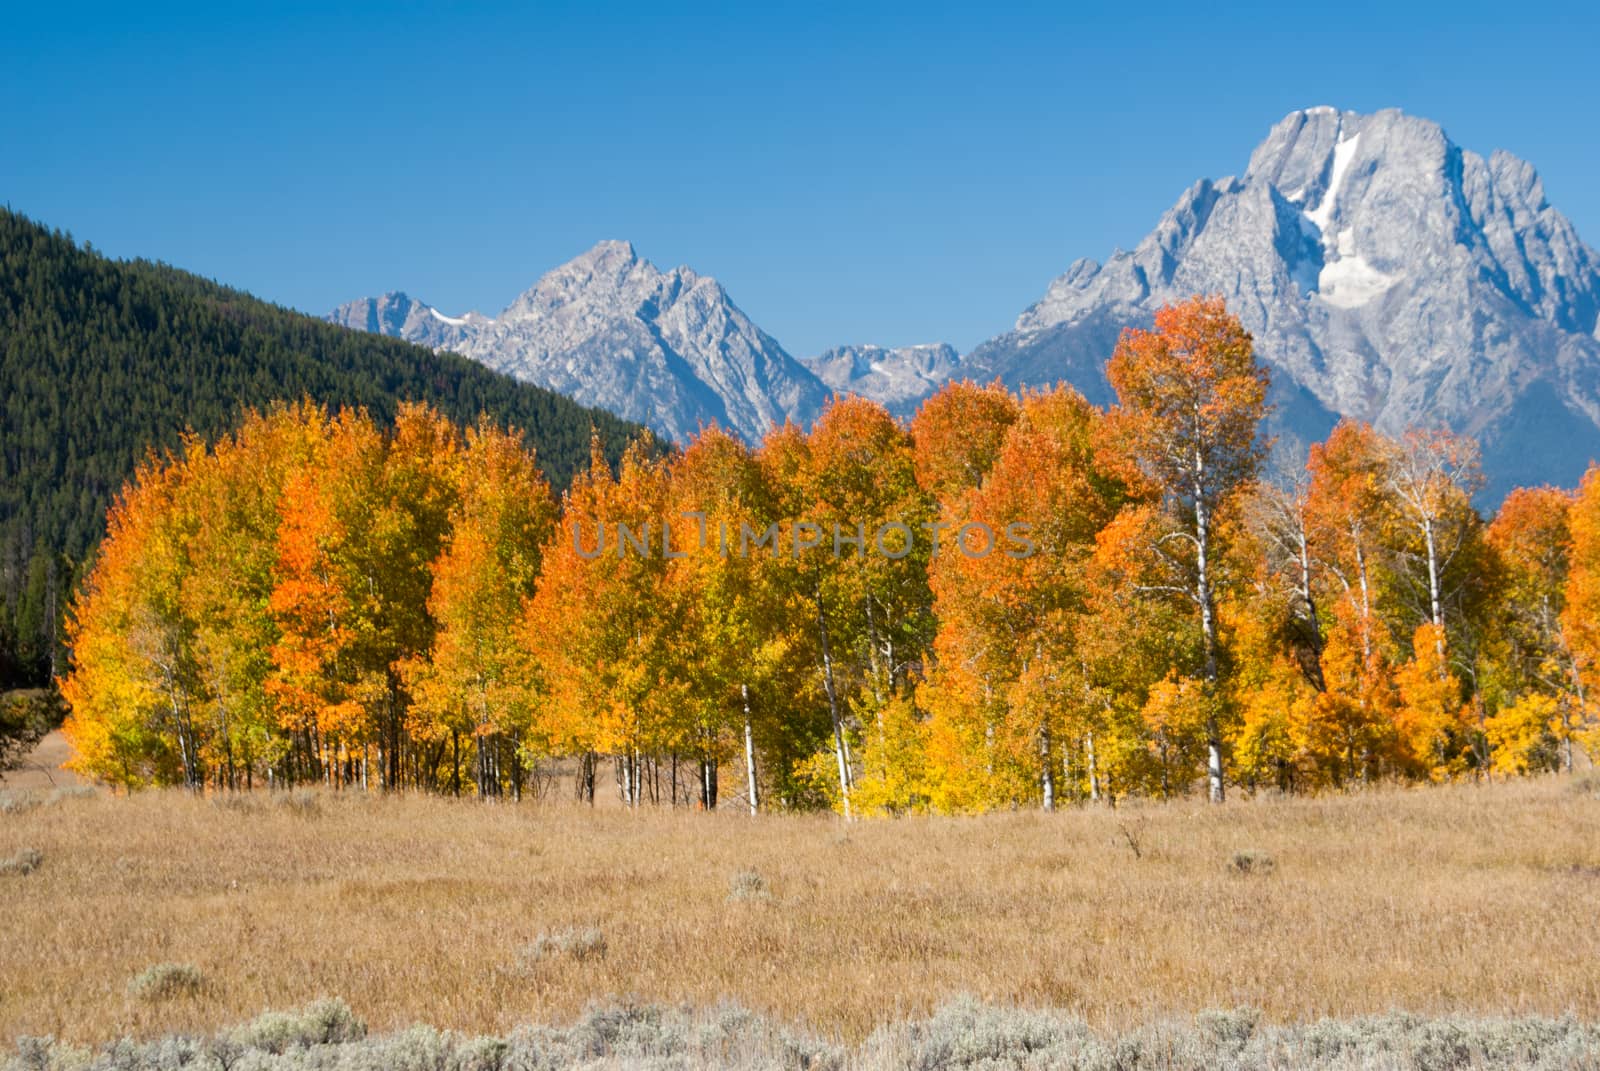 Autumn colors at Grand Tetons by emattil